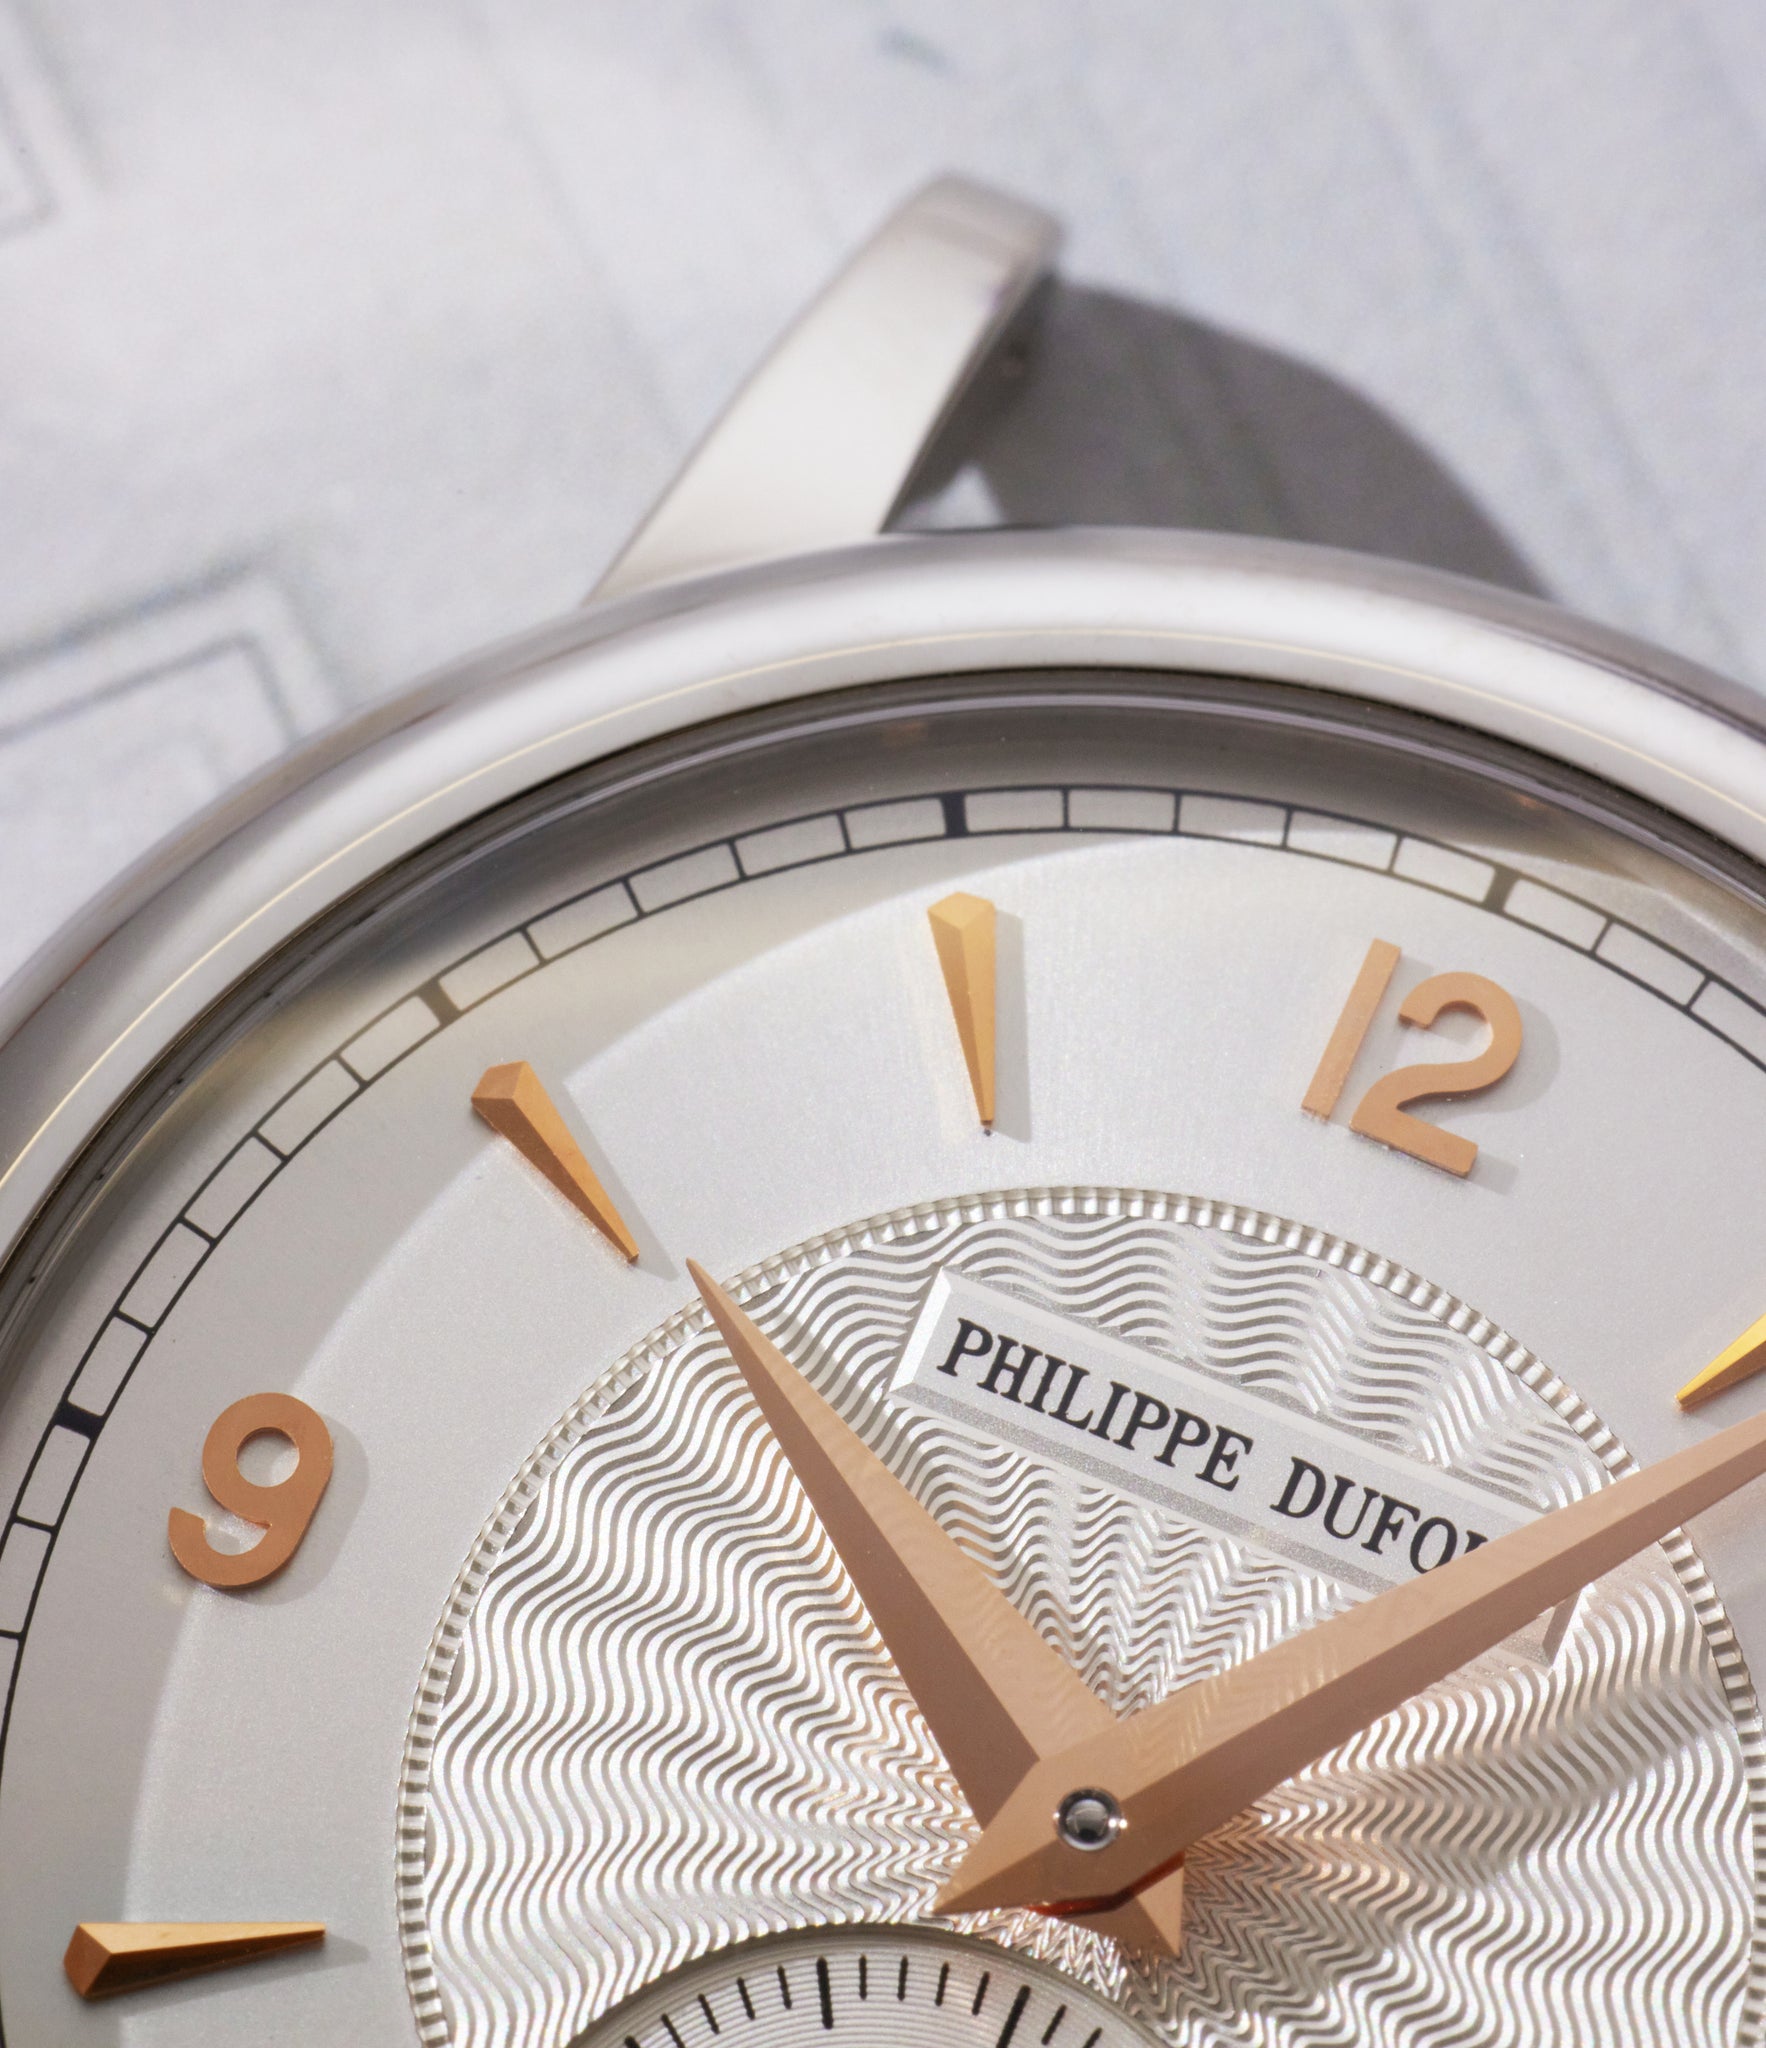 Philippe Dufour Simplicity | White Gold | Solid Silver Dial | Swiss handmade manual winding | A Collected Man London